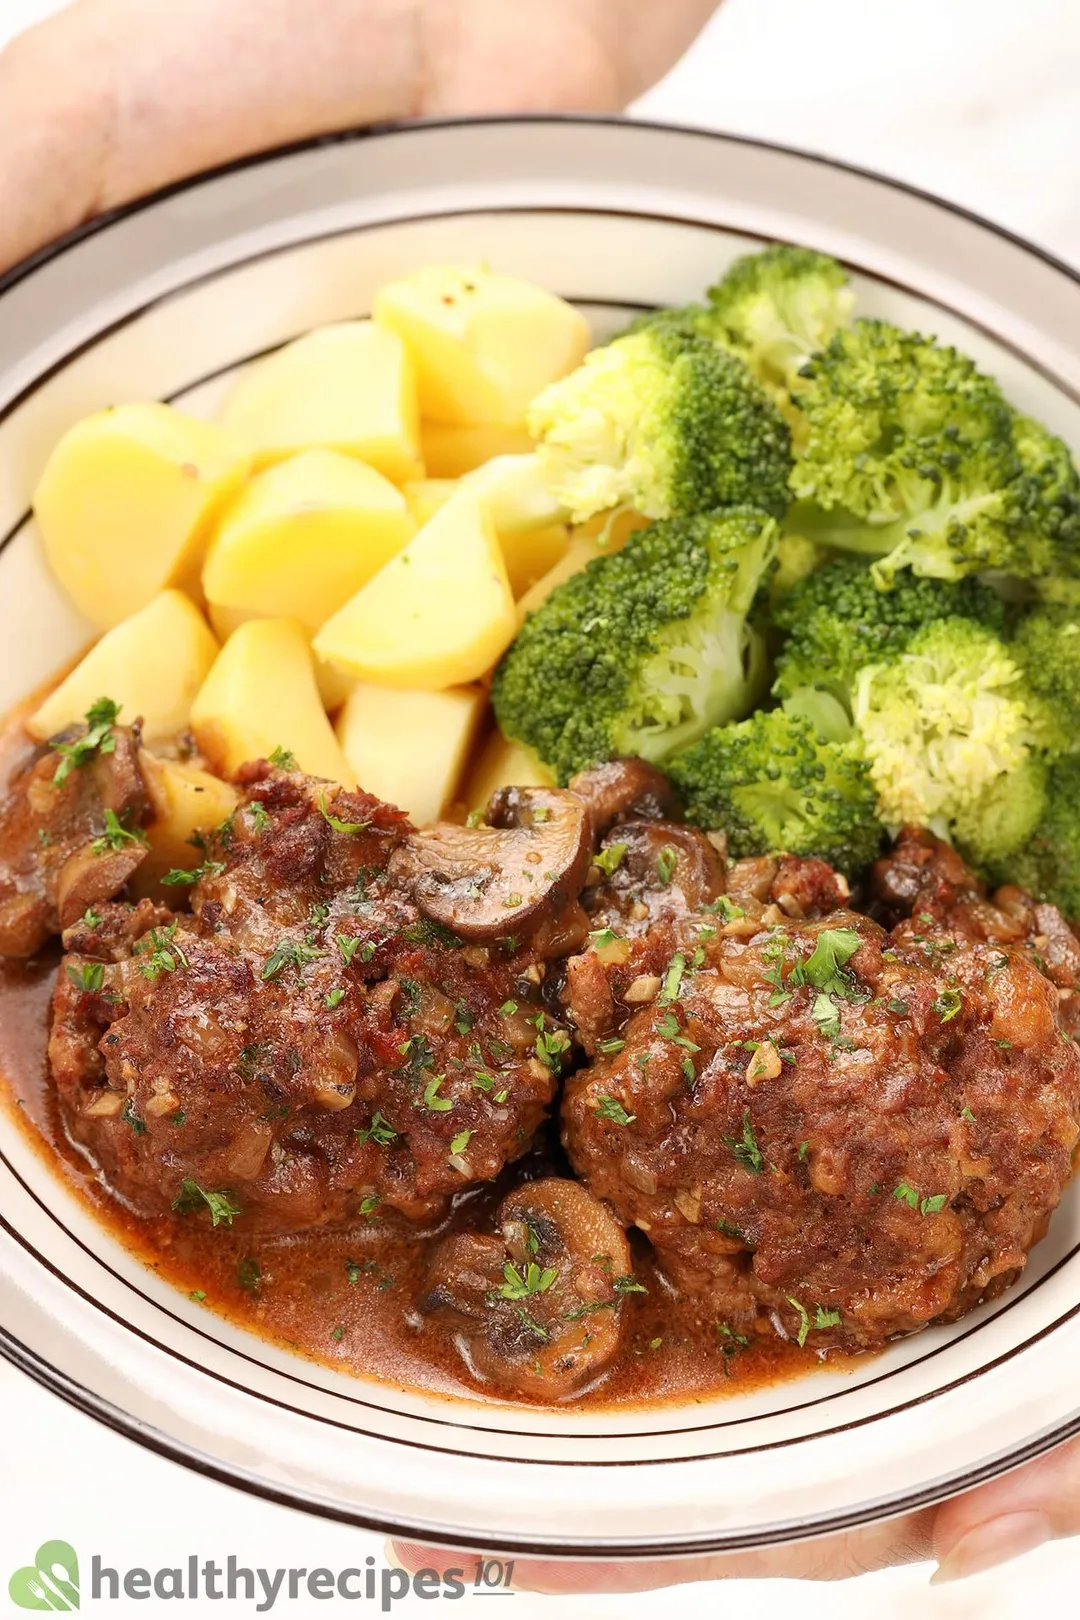 hand holding a plate of cooked beef with mushroom, cubed potatoes and broccoli